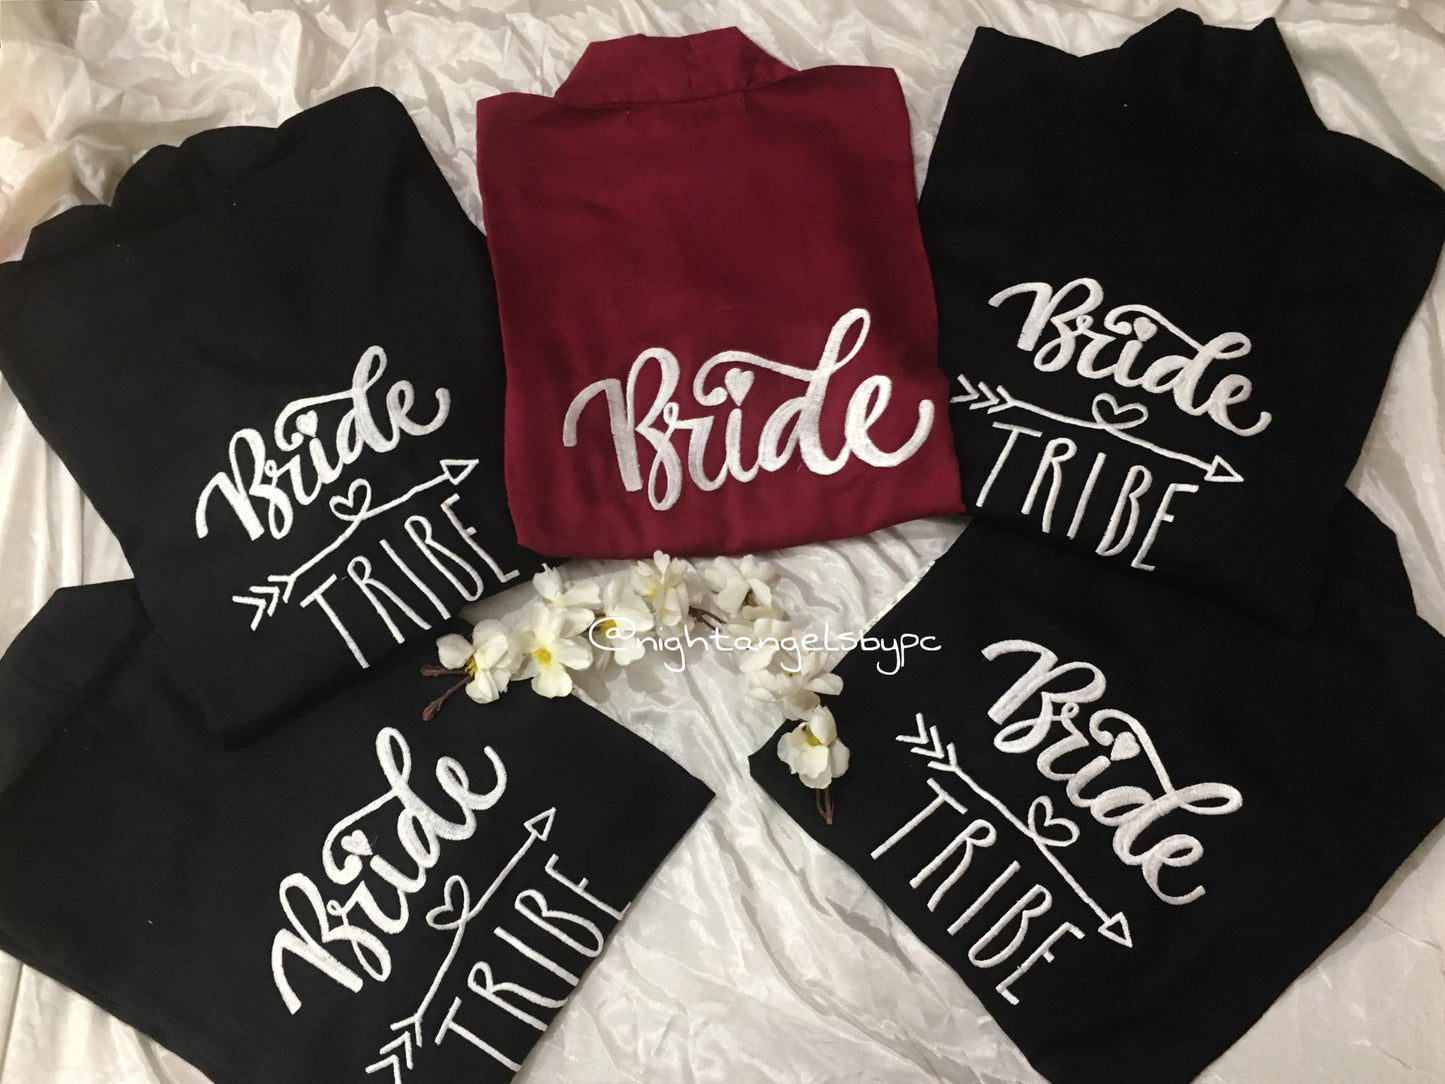 Bride Tribe Cotton Lace Robes